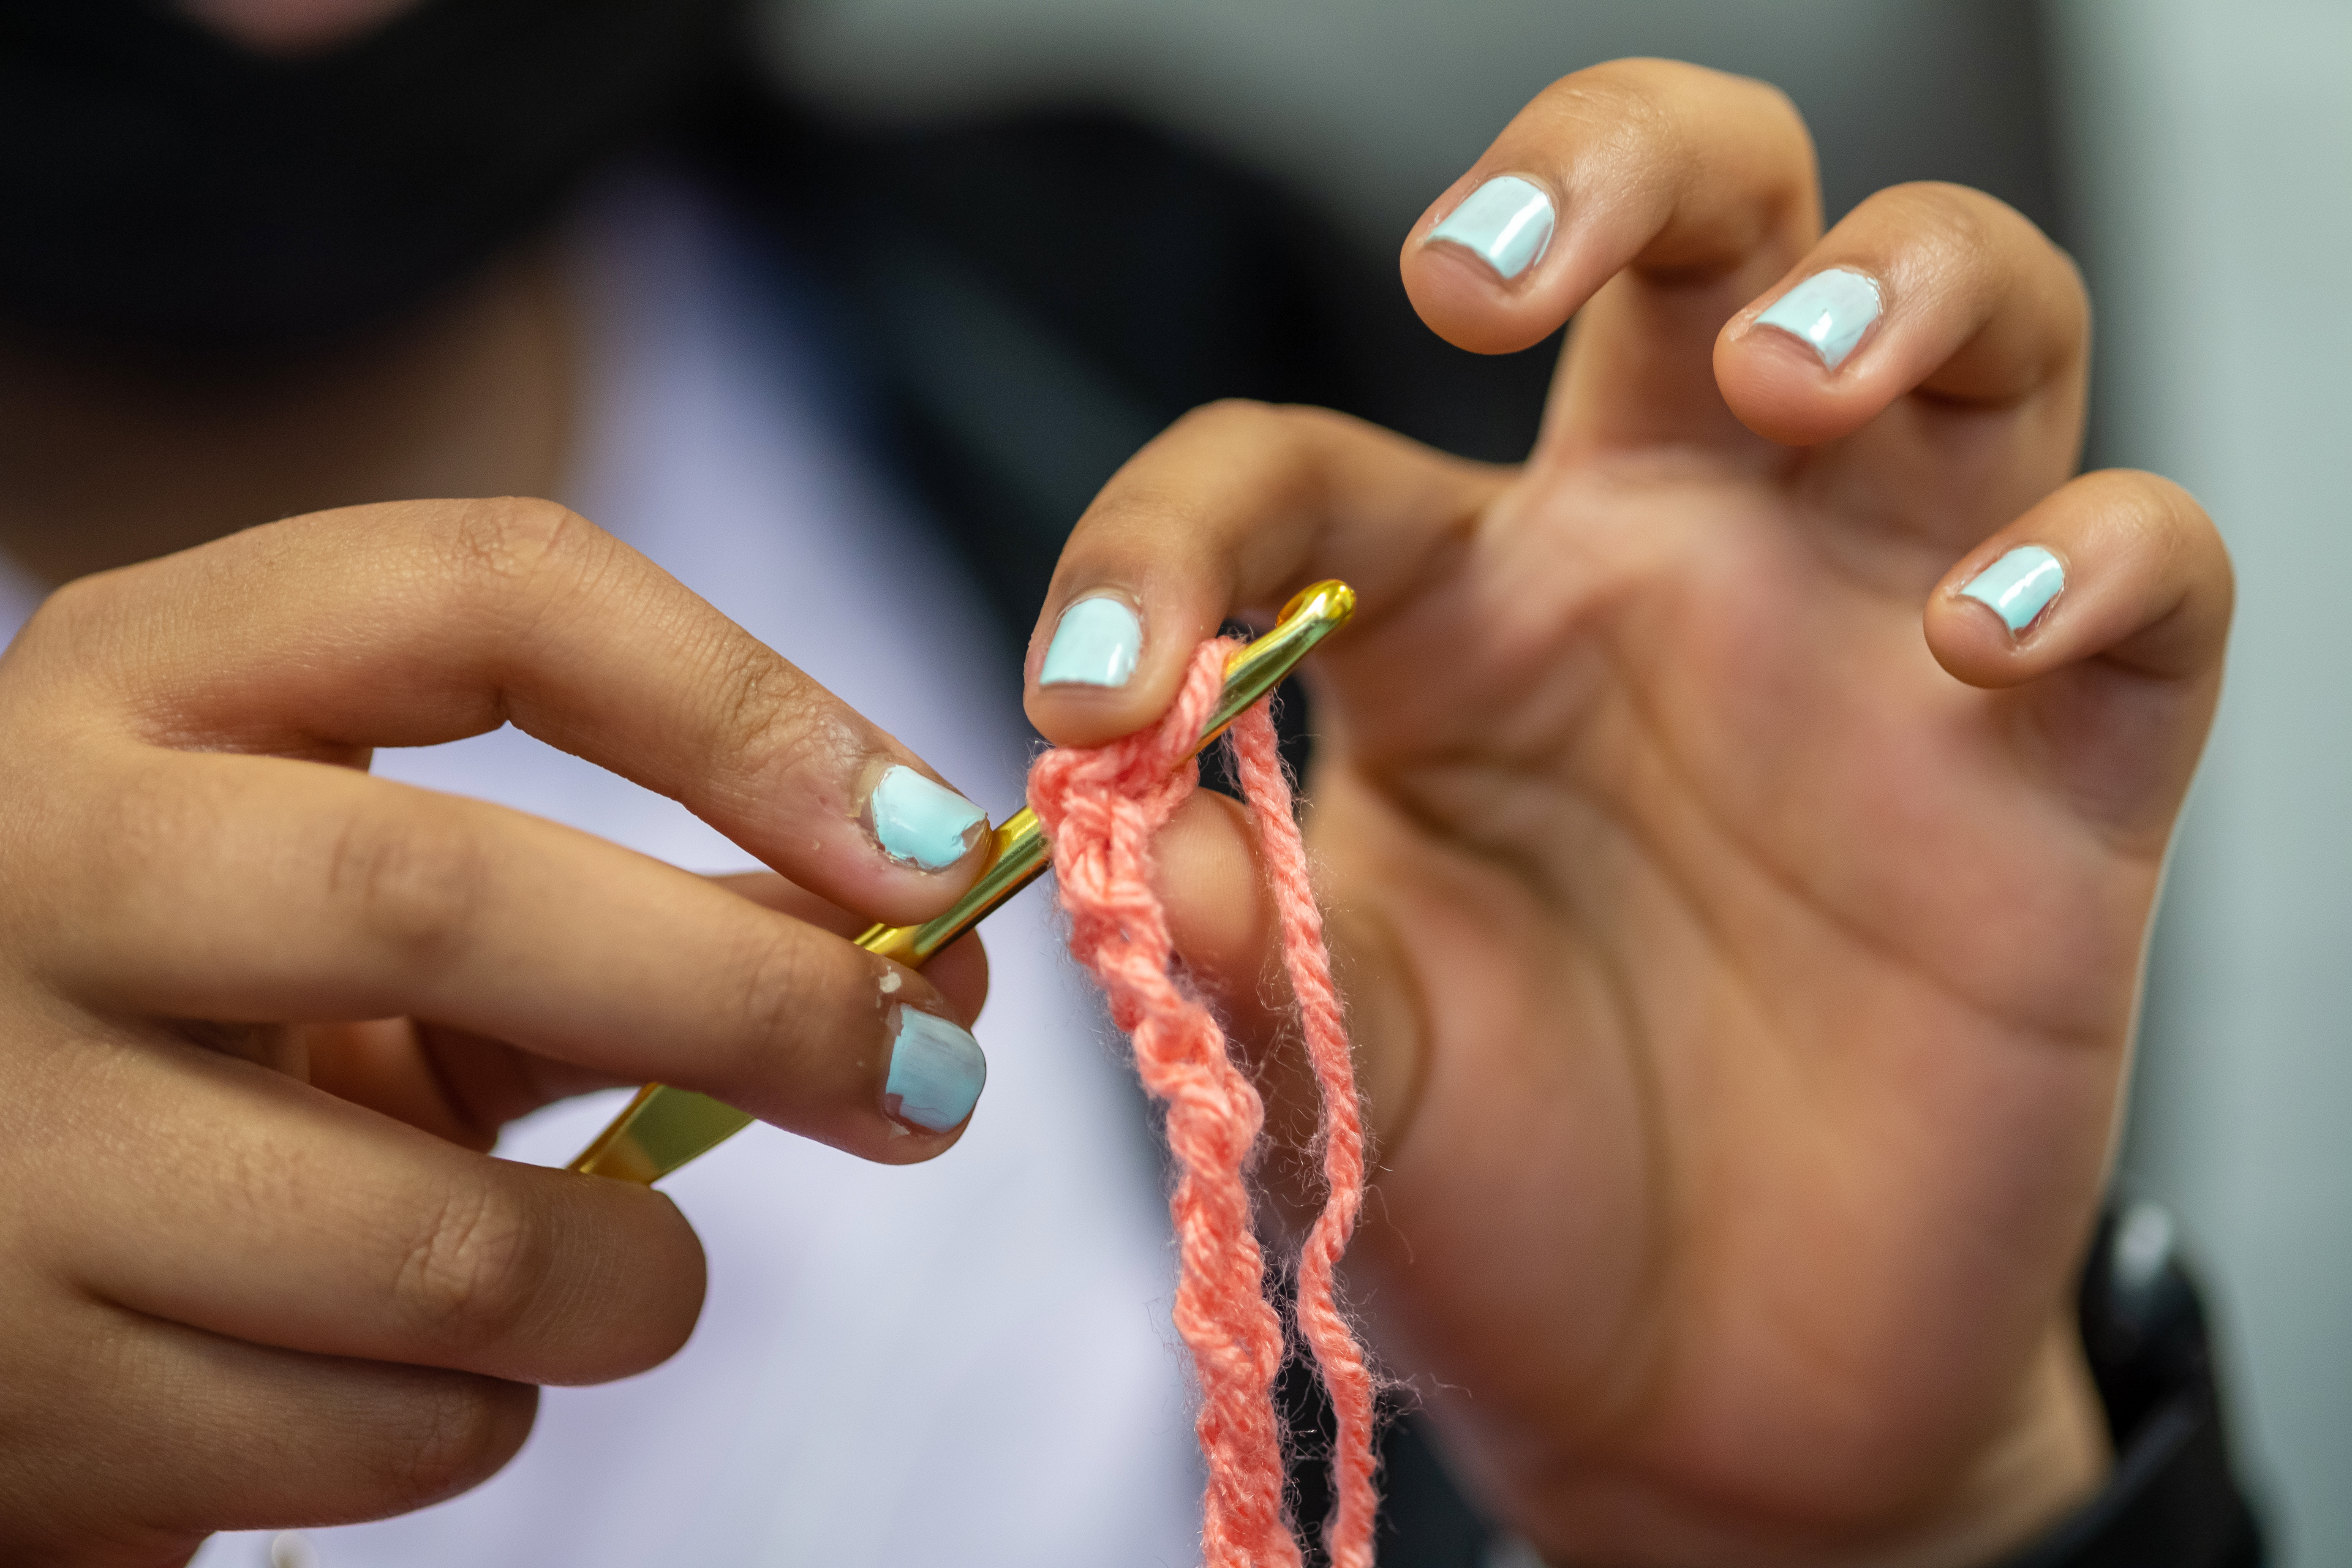 A student at Katherine Johnson Middle School crochets with pink yarn.